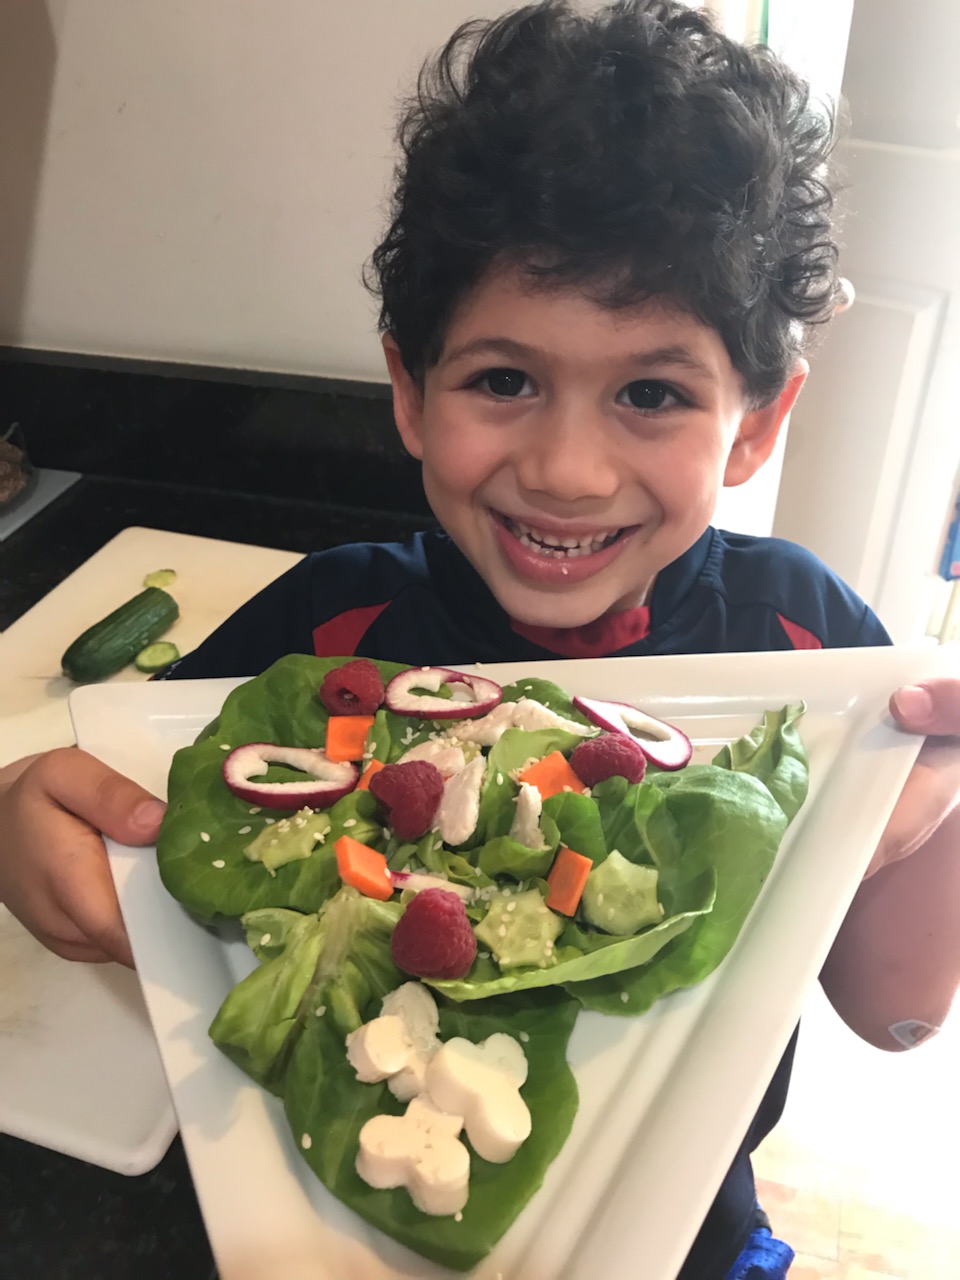 Kid with a salad full of shapes